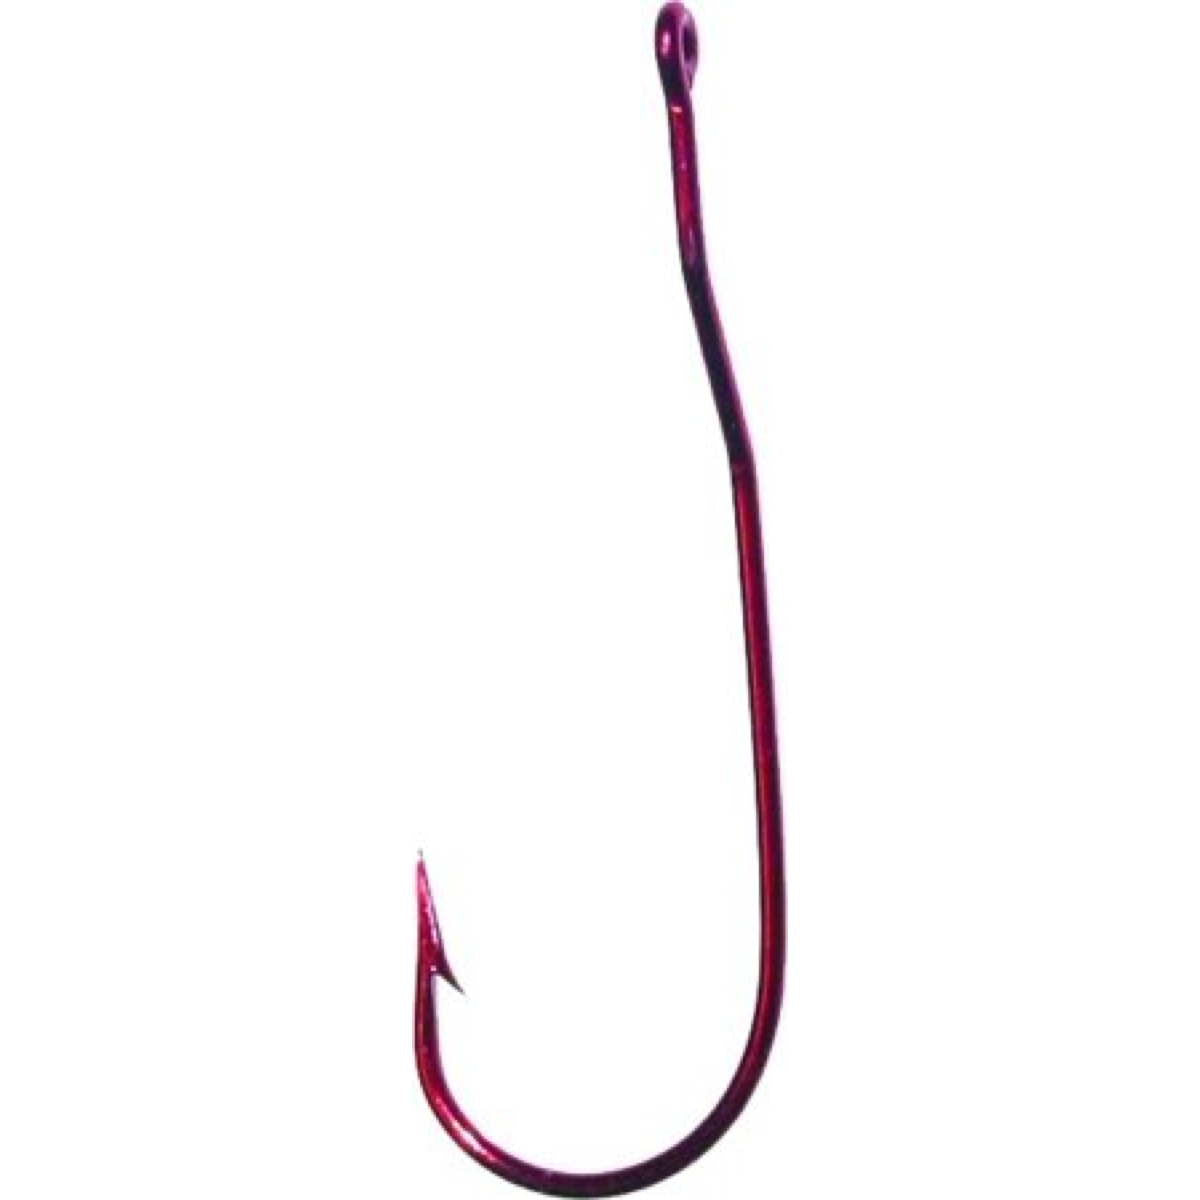 Photo of Tru-Turn Cam-Action Fine Wire Hook for sale at United Tackle Shops.